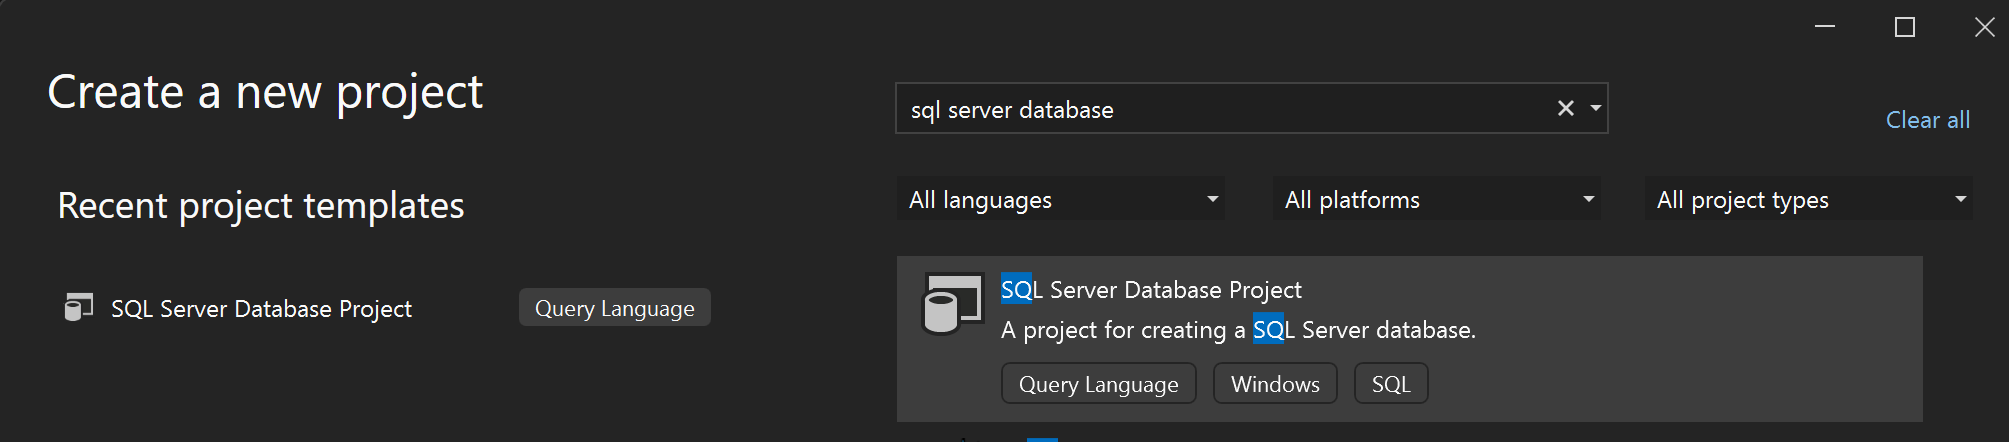 Boost your CICD automation for Synapse SQL Serverless by taking advantage of SSDT and SqlPackage CLI